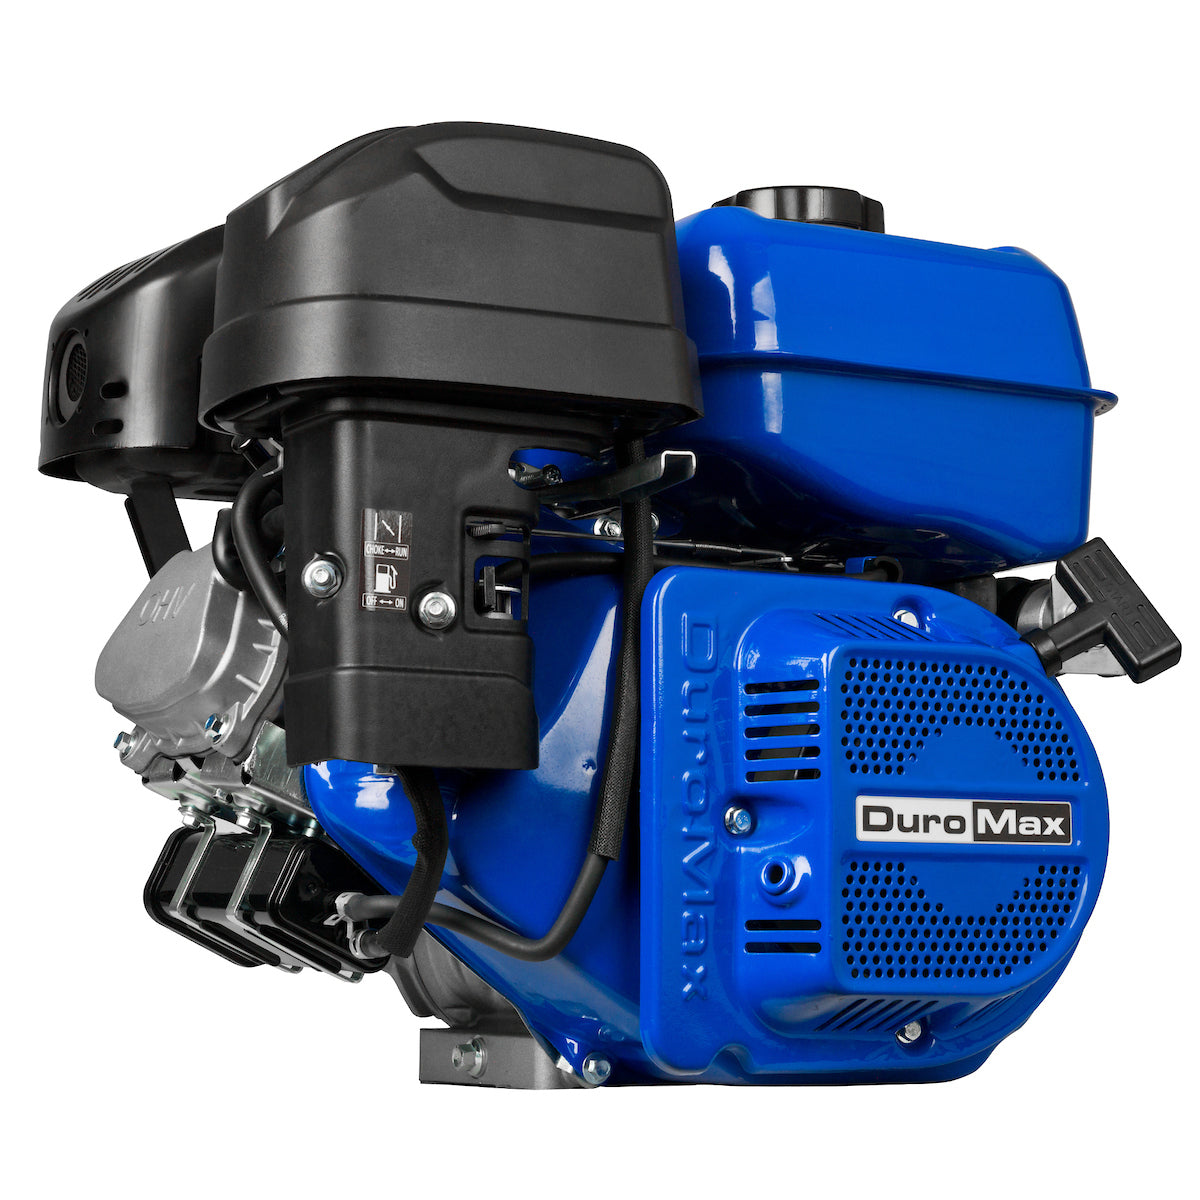 DuroMax XP9HPE 274cc 25mm Shaft Recoil Electric Start Gasoline Engine - image 1 of 12